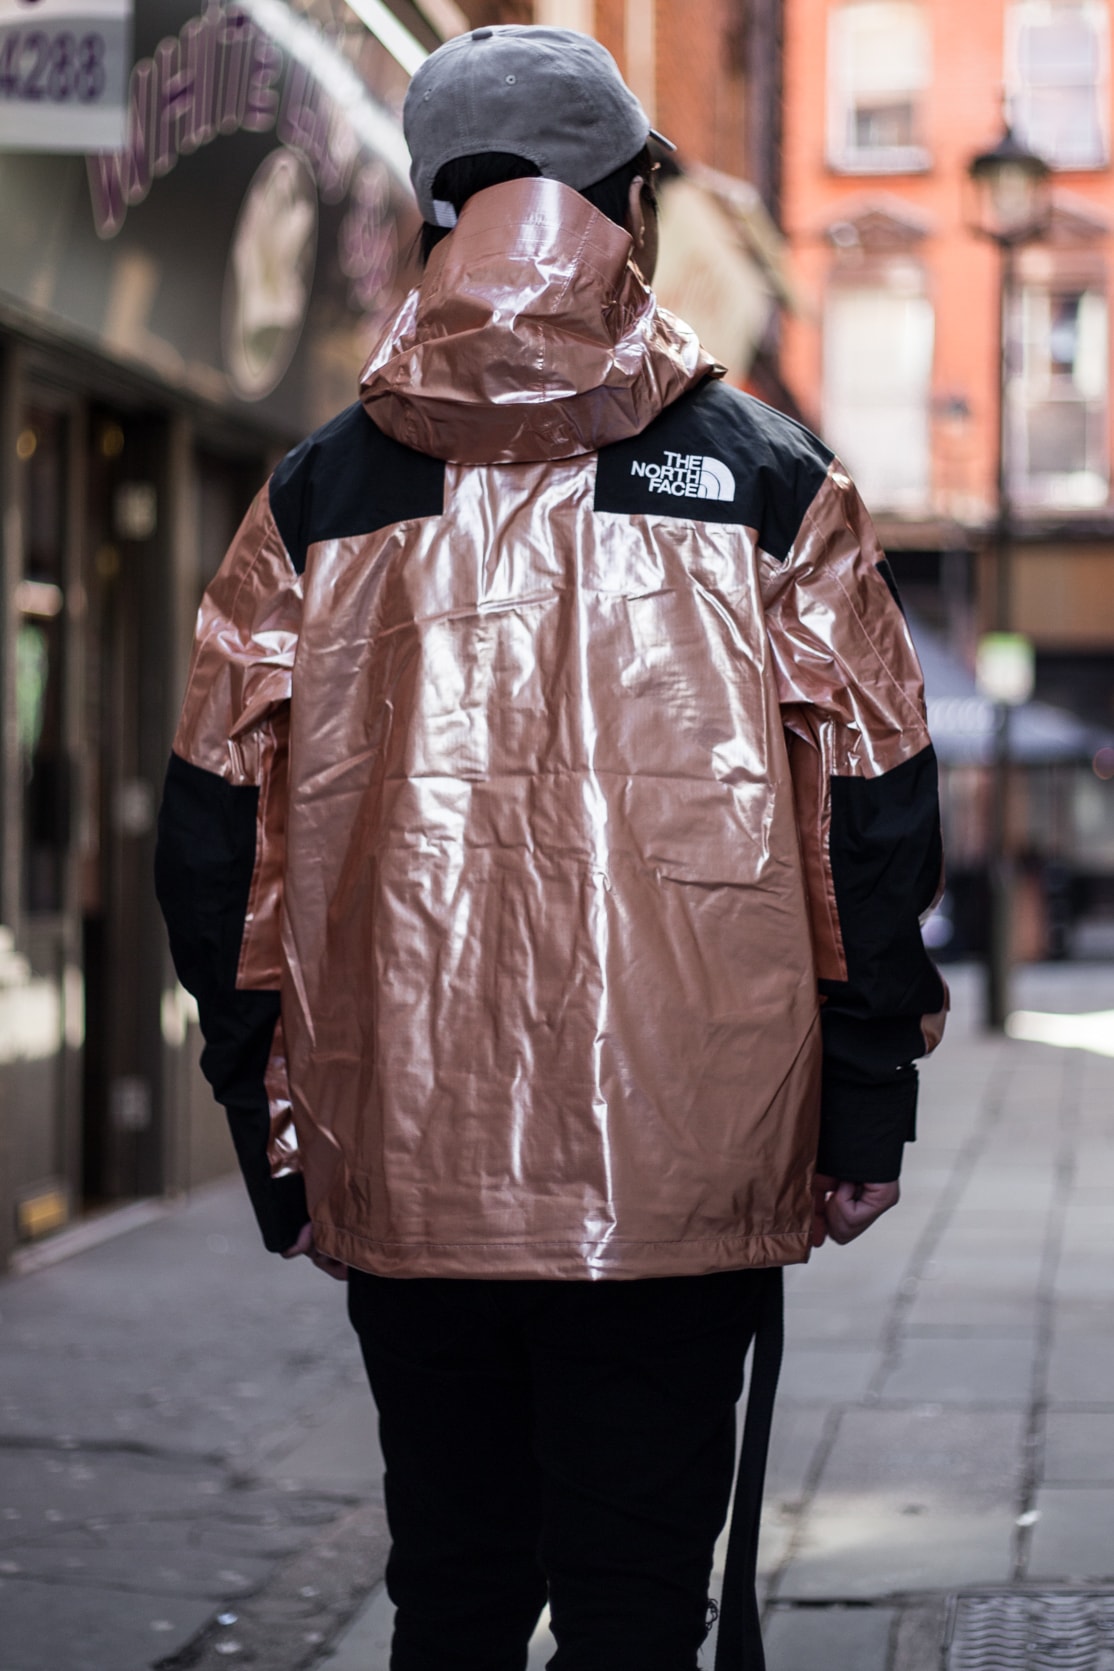 Supreme The North Face Spring/Summer 2018 Streetsnaps Street Style London Paris Tokyo New York Store Release Drop Soho Clothing For Sale Buy Shop Online Metallic